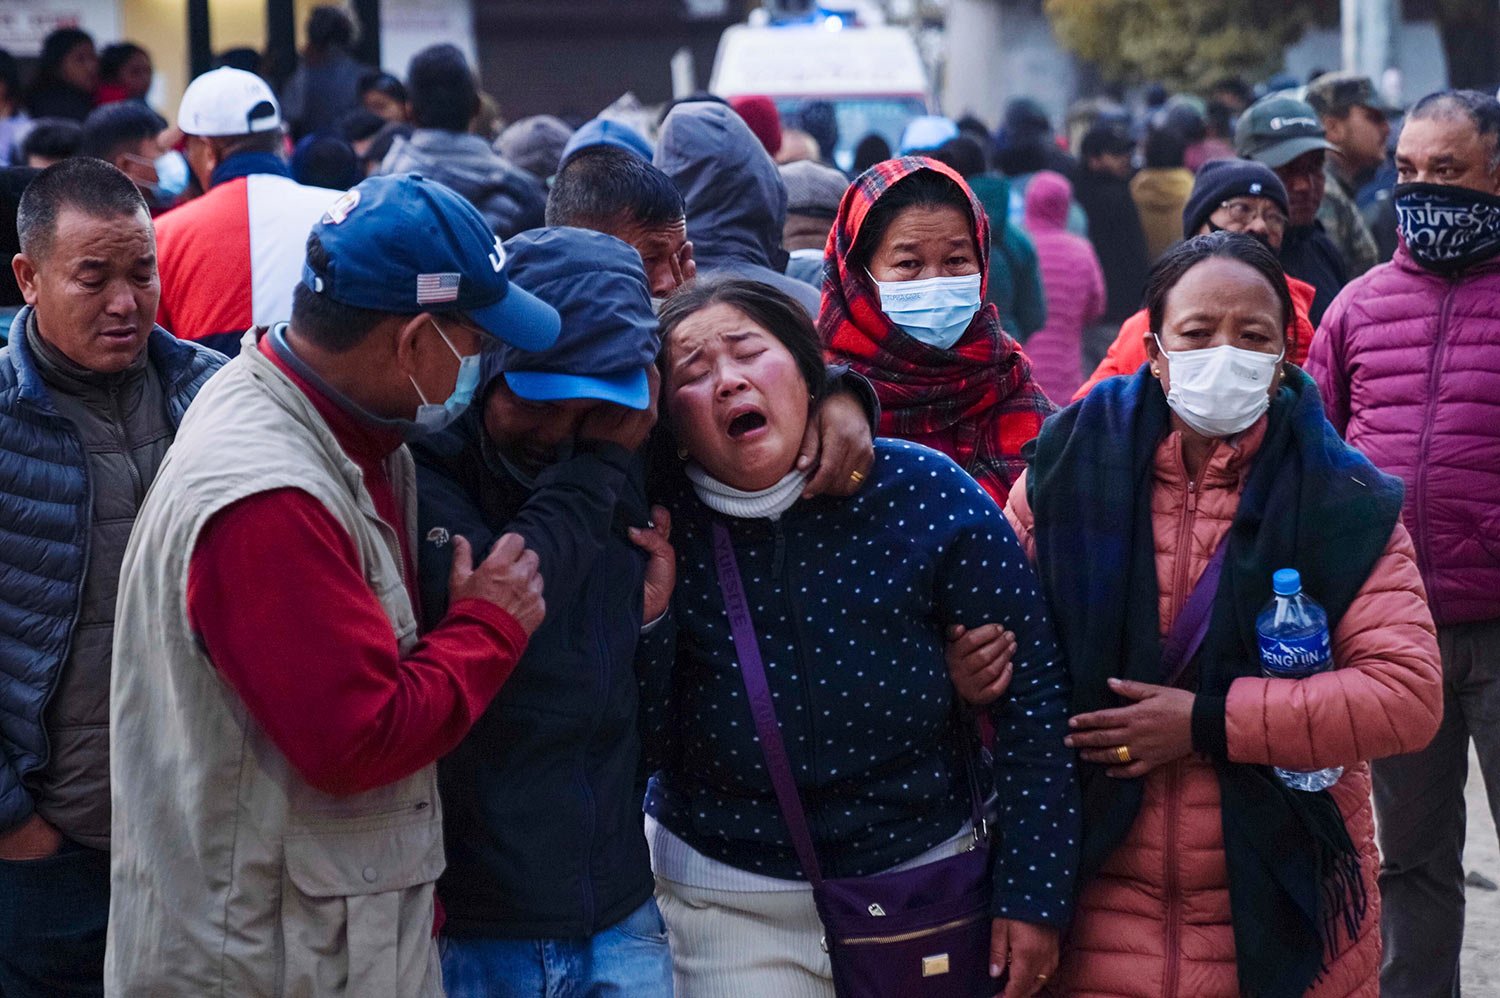  A woman cries as the body of a relative, who was a plane crash victim, is brought to a hospital in Pokhara, Nepal, Sunday, Jan. 15, 2023. (AP Photo/Yunish Gurung) 